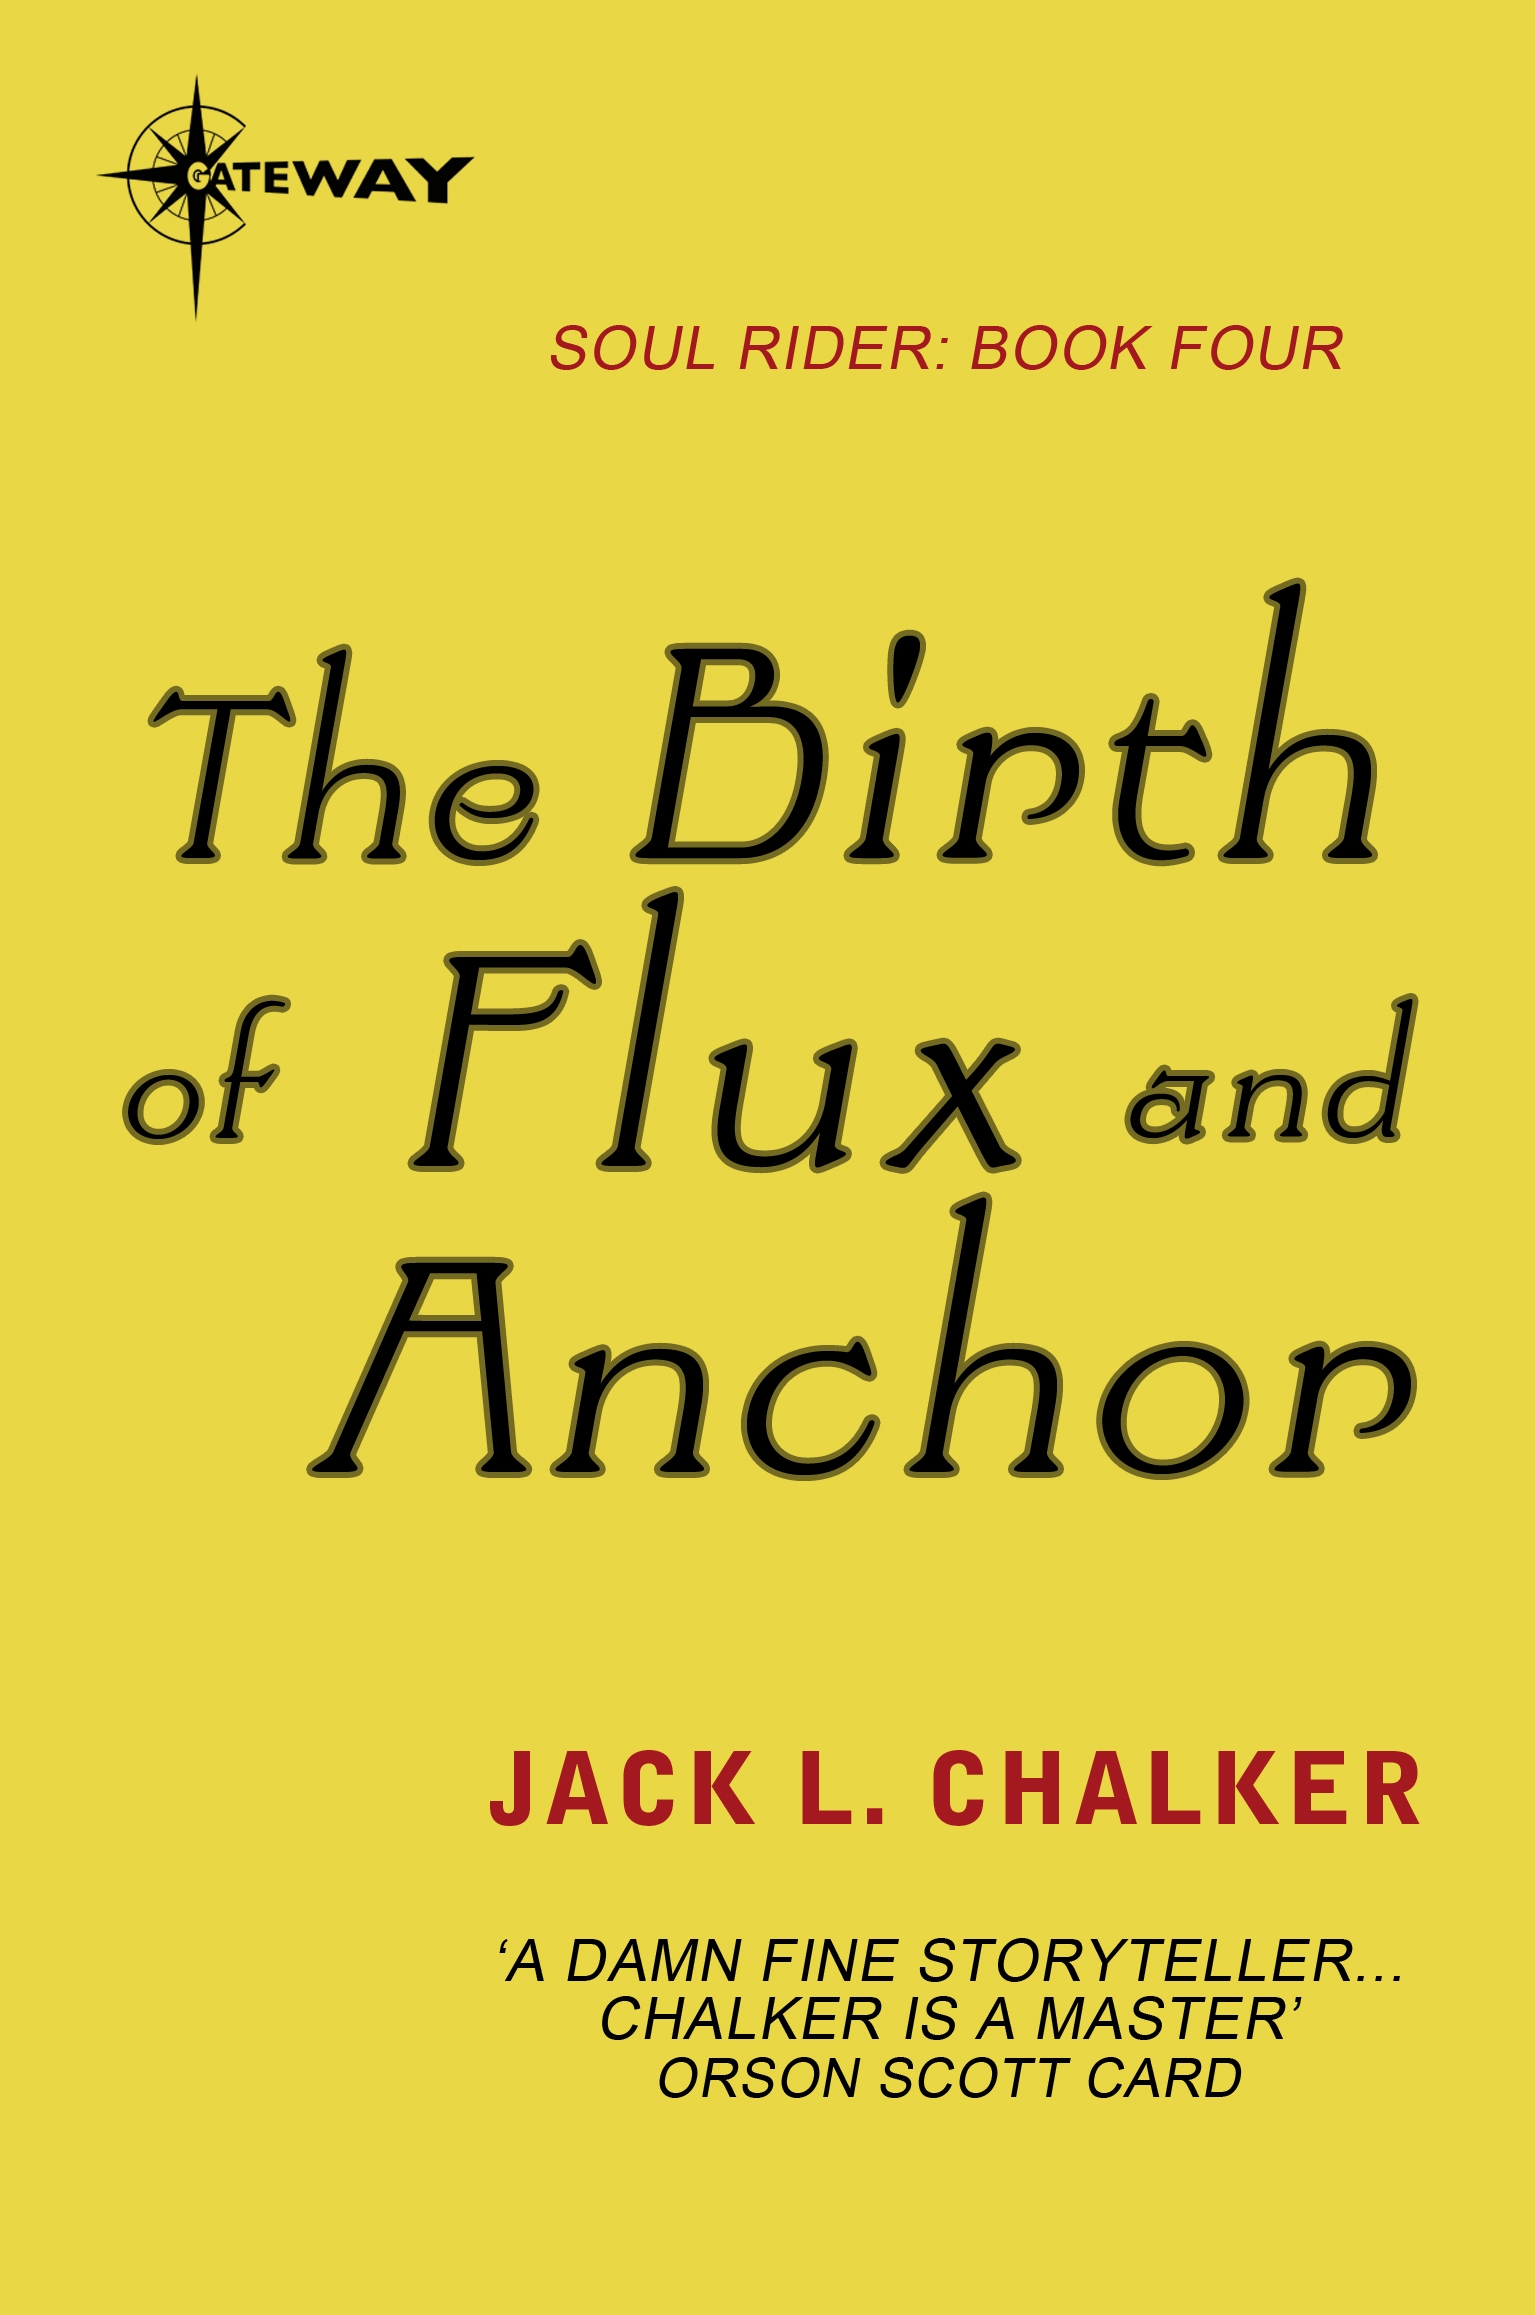 The Birth of Flux and Anchor